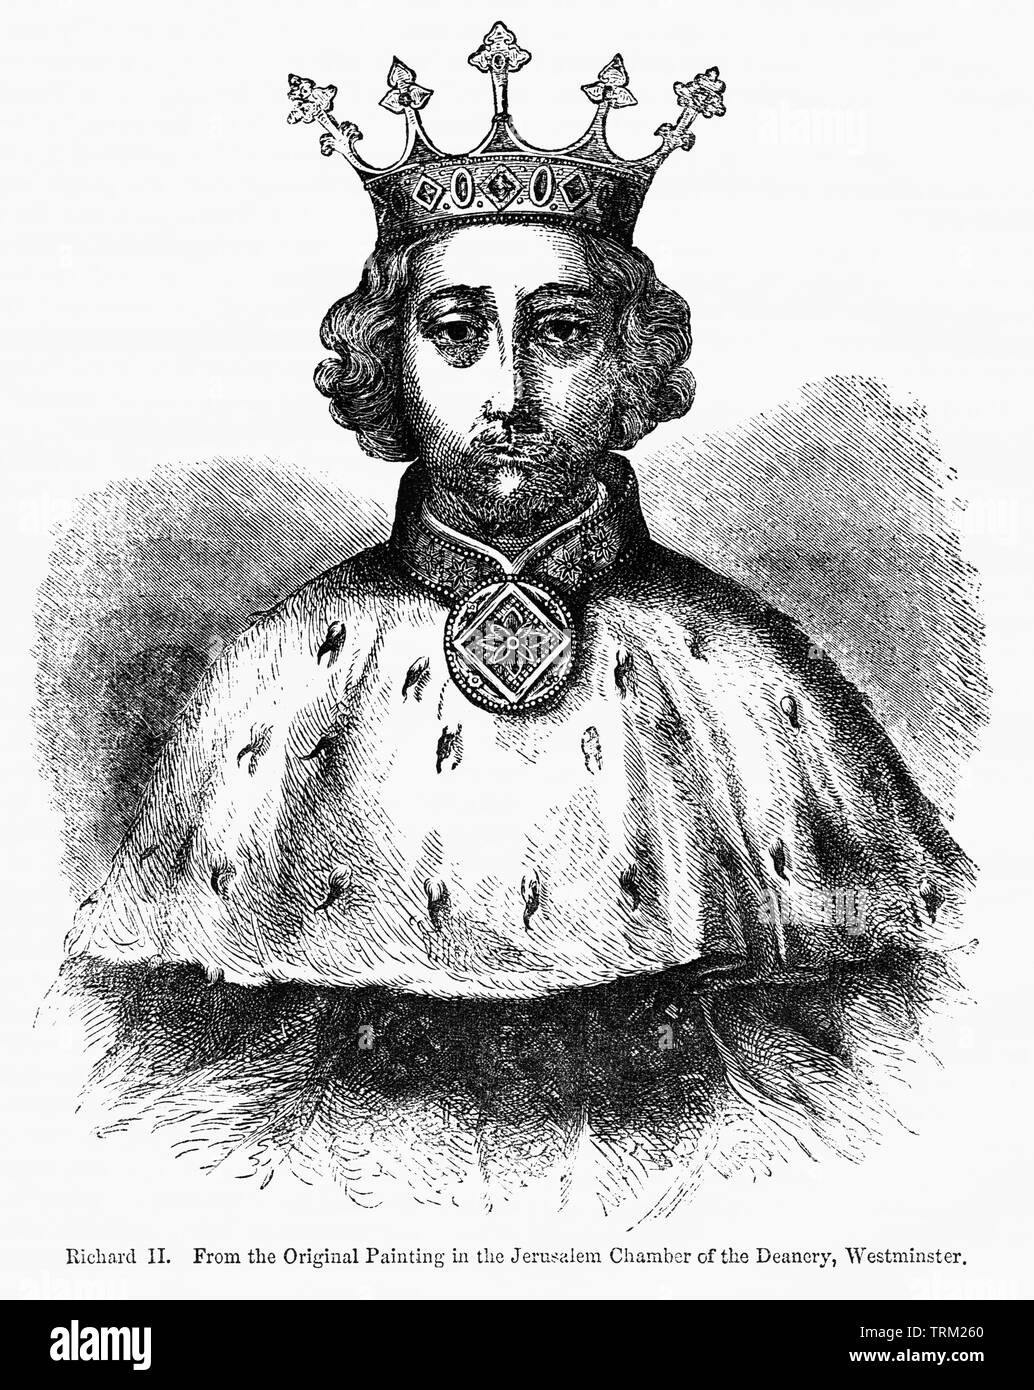 Richard II, King of England 1377-99, From the Original Painting in the Jerusalem Chamber of the Deanery, Westminster, Illustration from John Cassell's Illustrated History of England, Vol. I from the earliest period to the reign of Edward the Fourth, Cassell, Petter and Galpin, 1857 Stock Photo